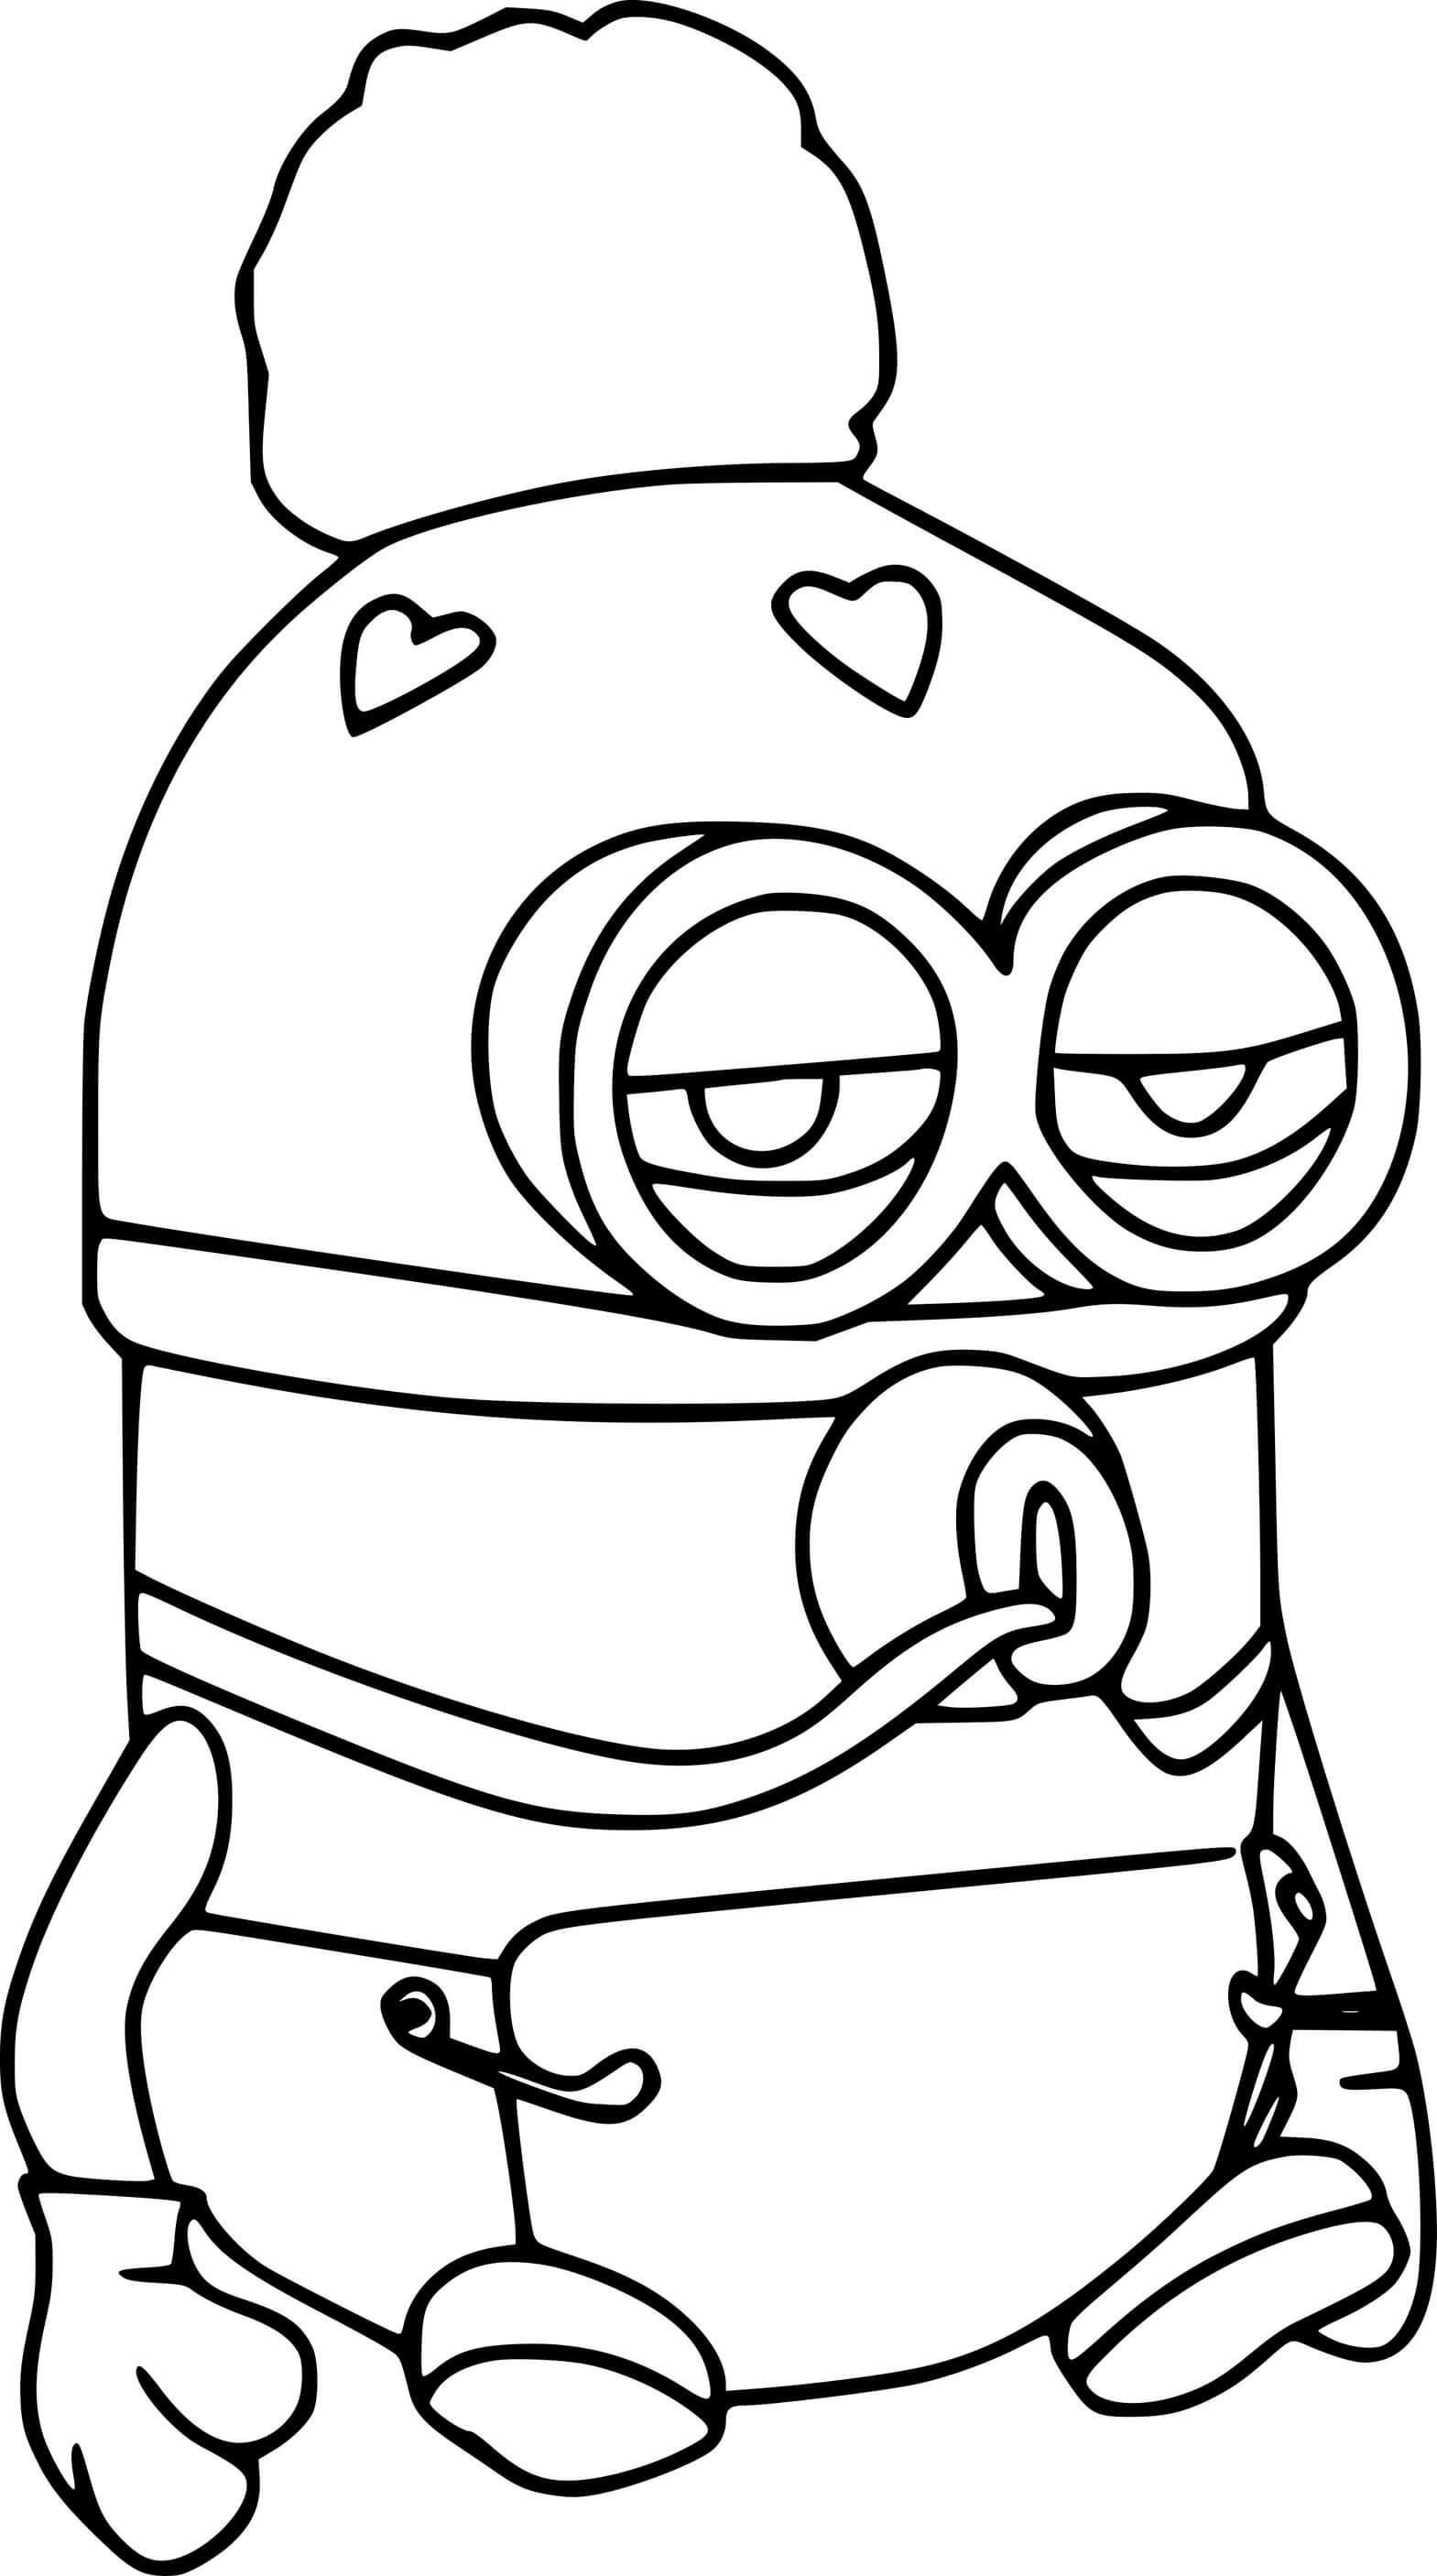 Baby Robot Minion Coloring Page